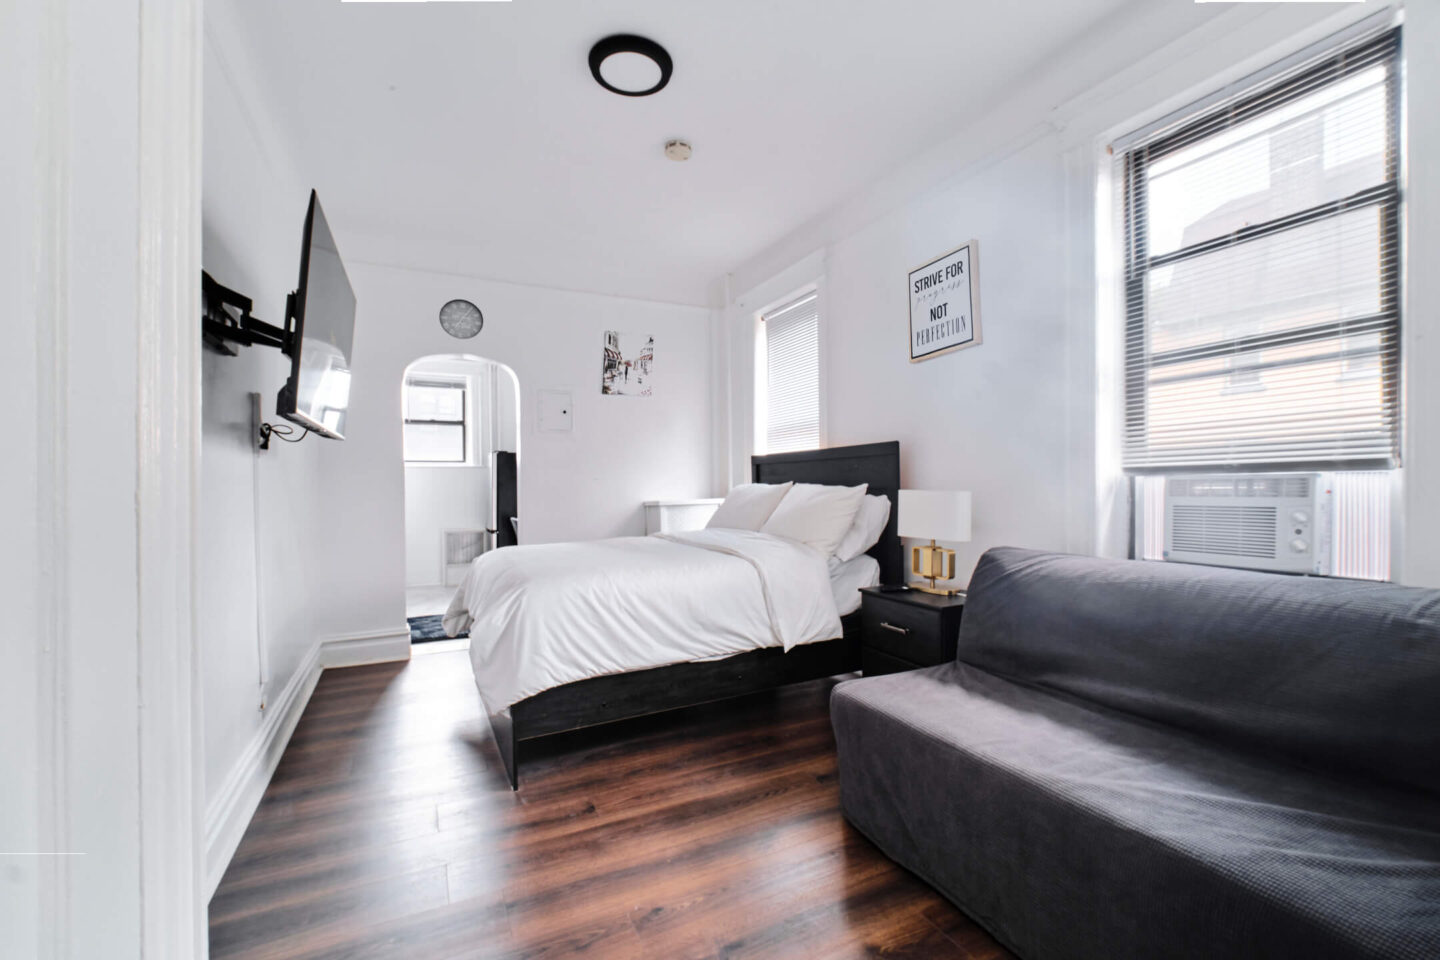 41-32 76th St, East Elmhurst, NY 11373 - Apt 1 - Real Estate Photography - AirBnB Listing